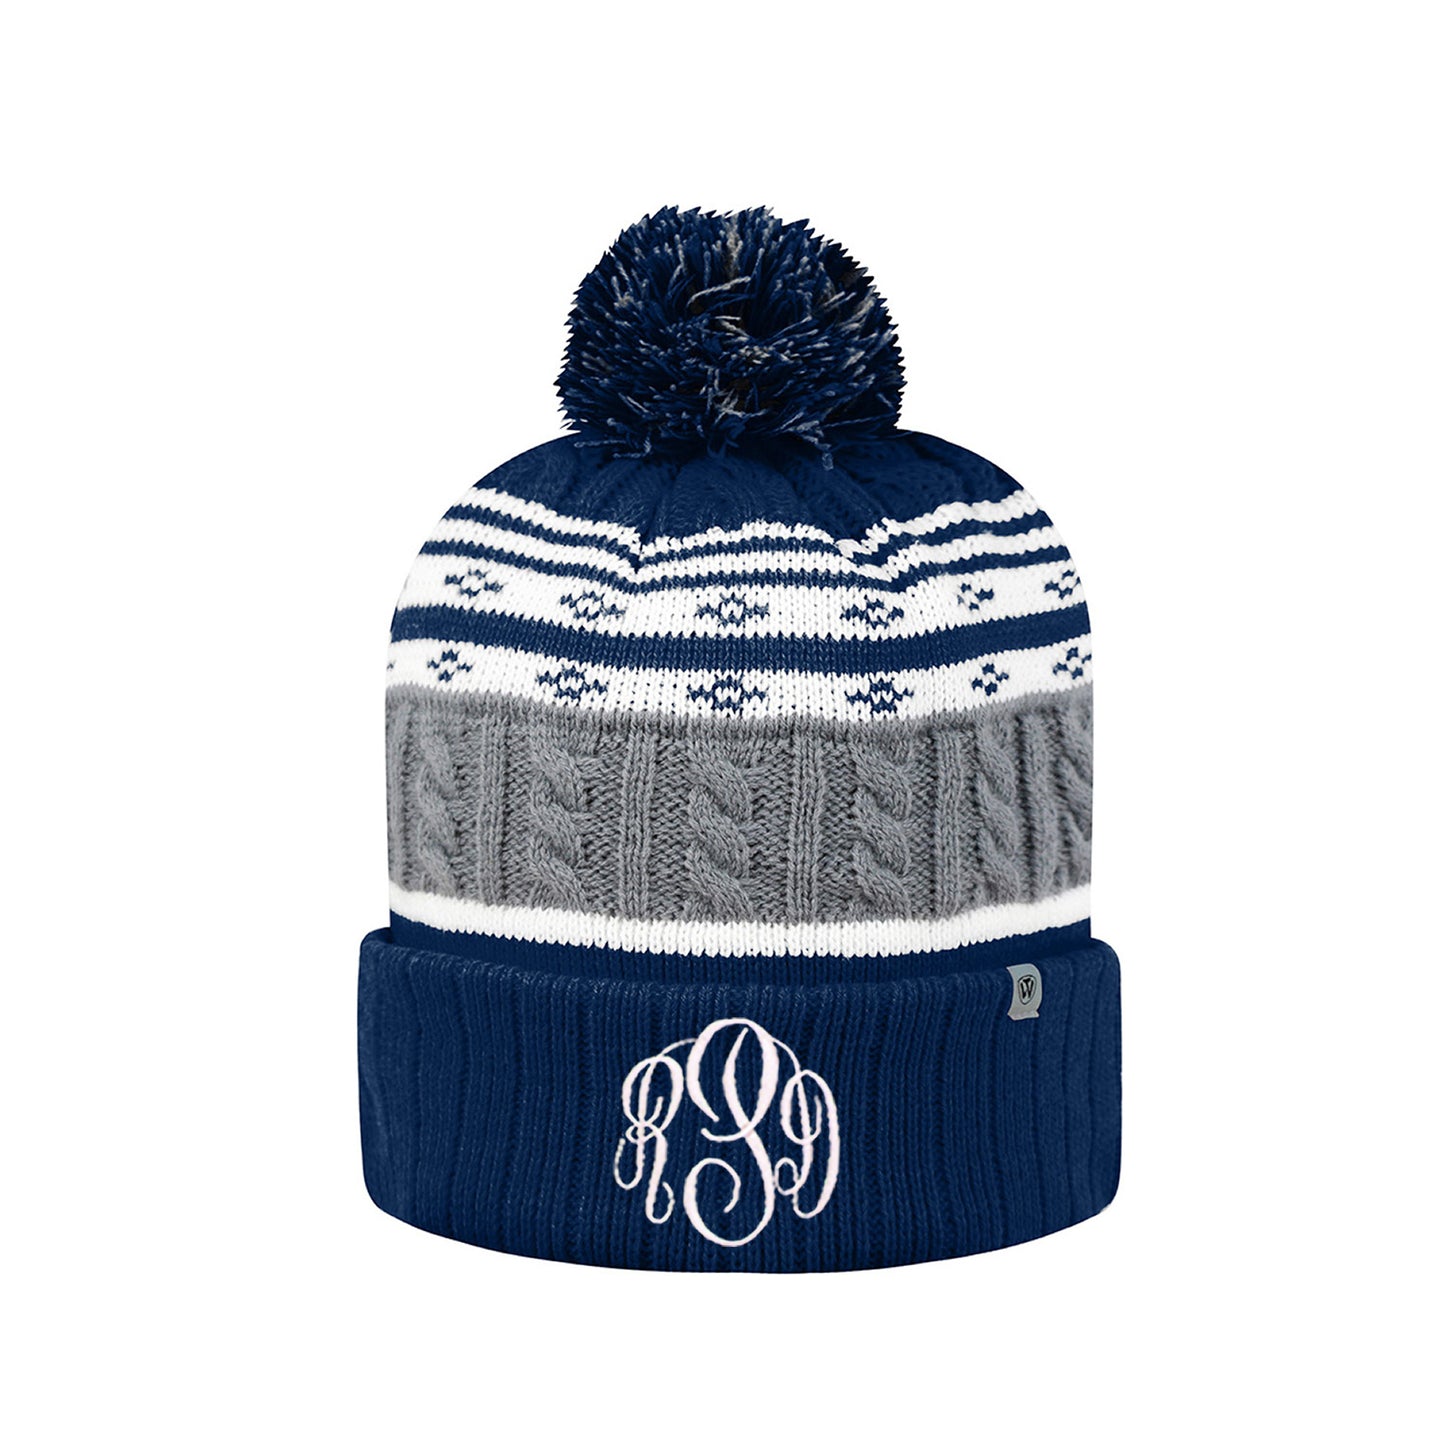 personalized winter hat